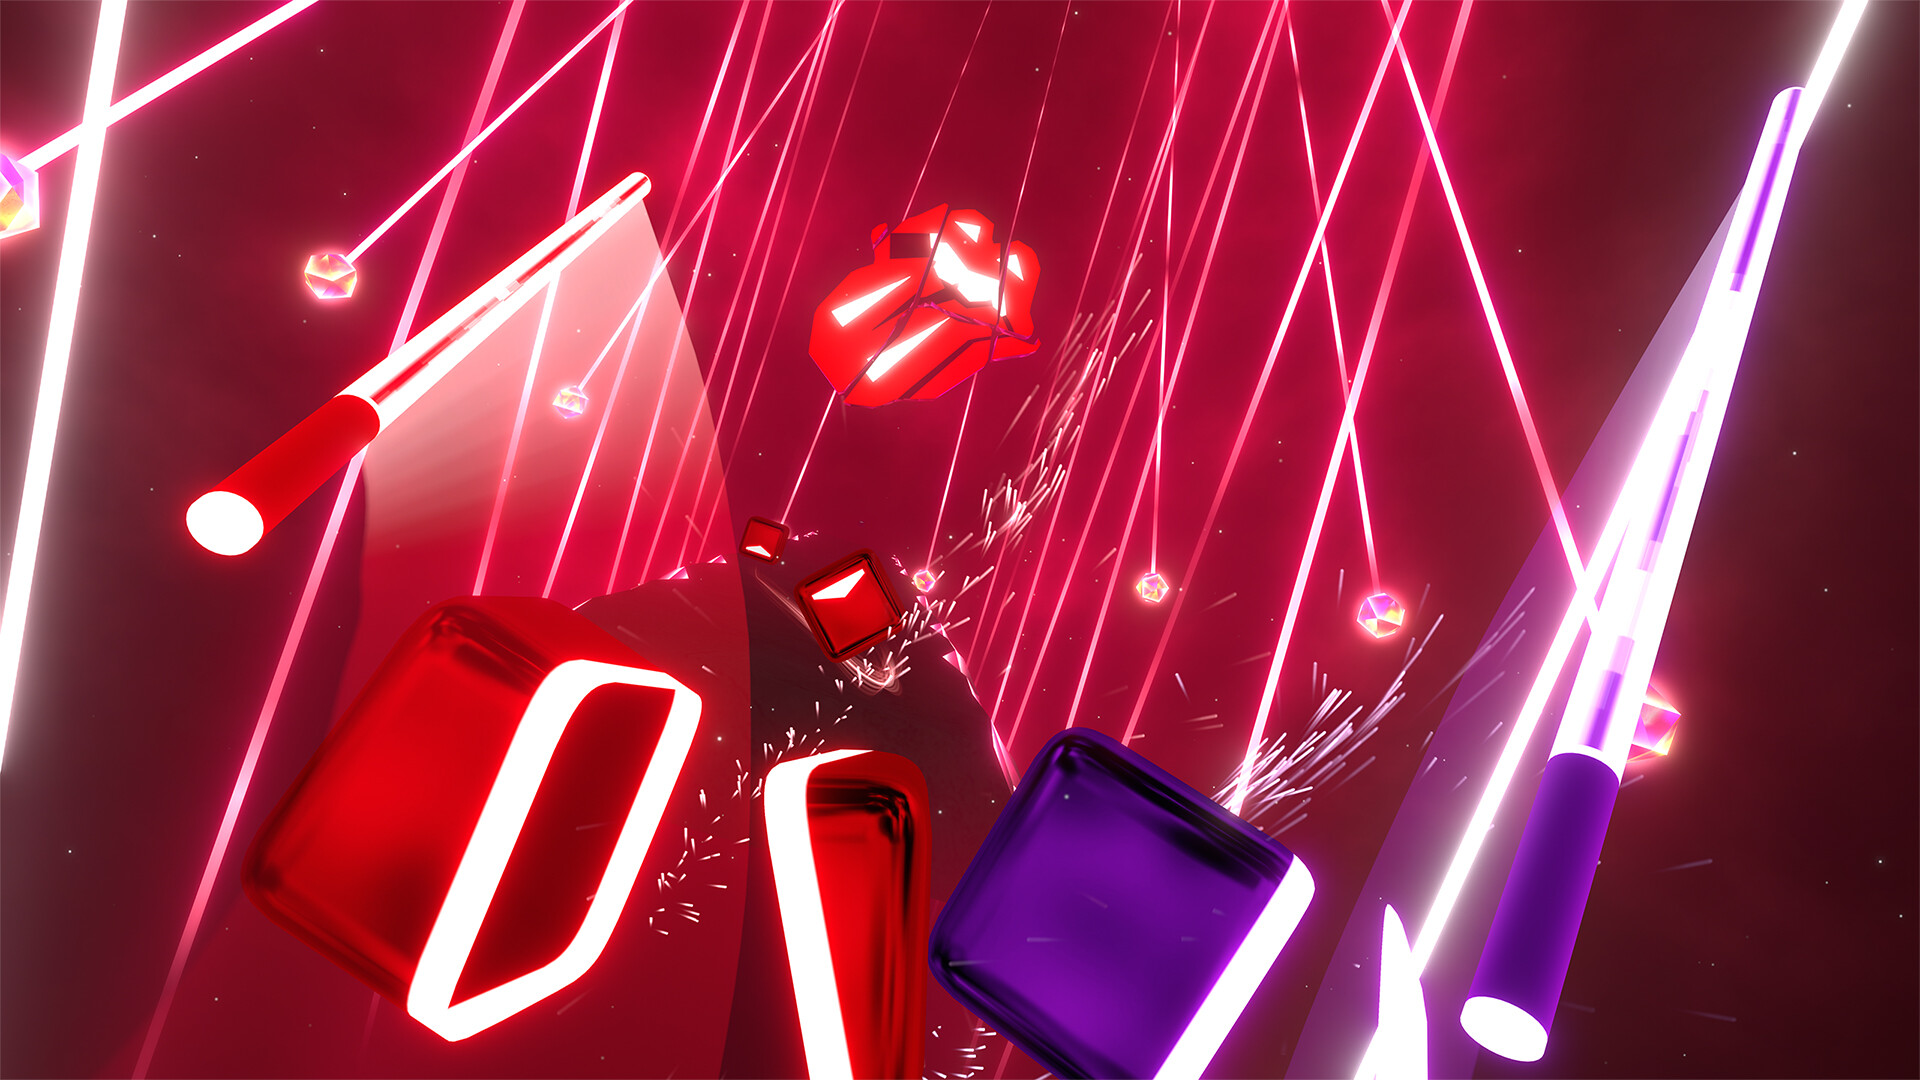 Beat Saber - The Rolling Stones - "Live by the Sword" Featured Screenshot #1